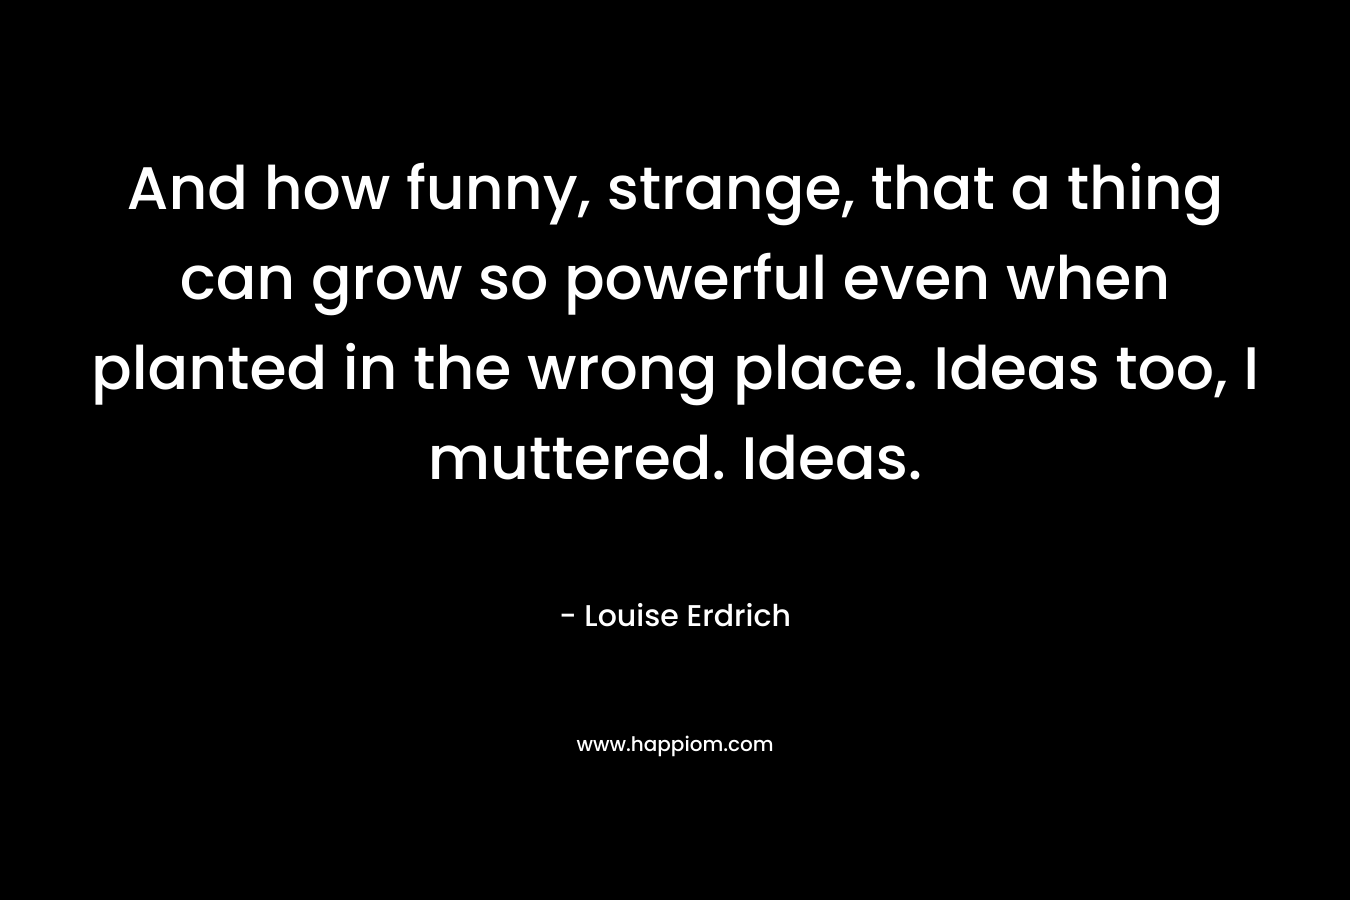 And how funny, strange, that a thing can grow so powerful even when planted in the wrong place. Ideas too, I muttered. Ideas. – Louise Erdrich